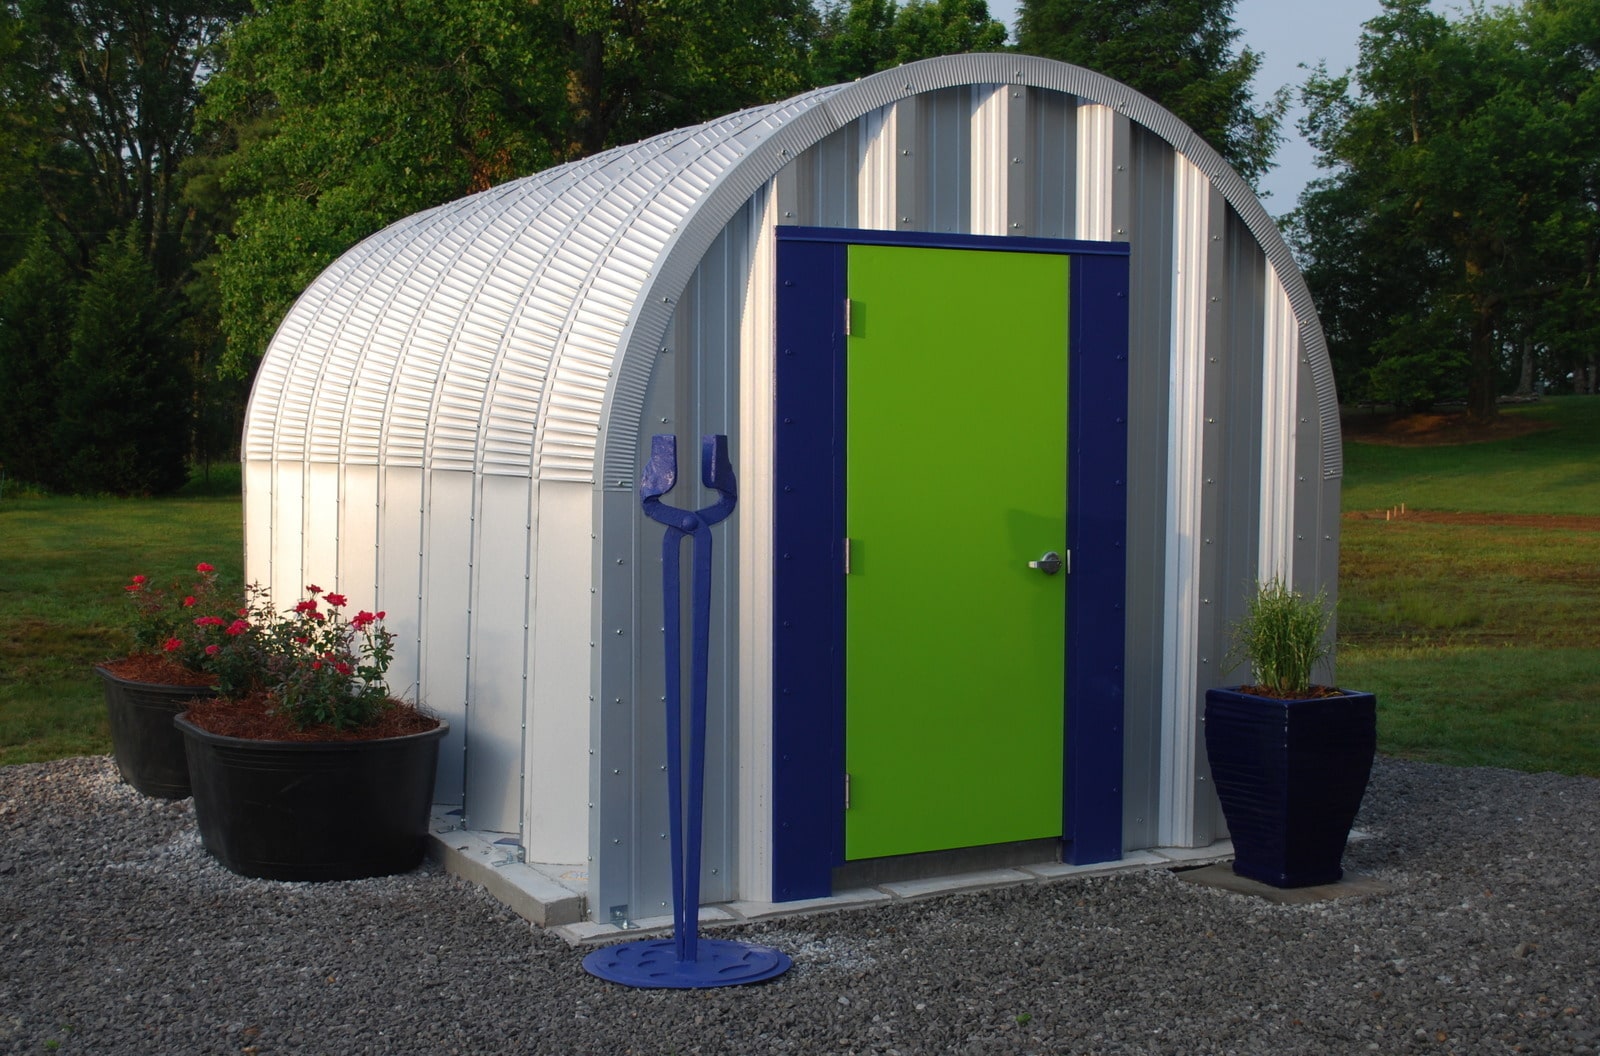 s-model quonset structure with blue and green front door